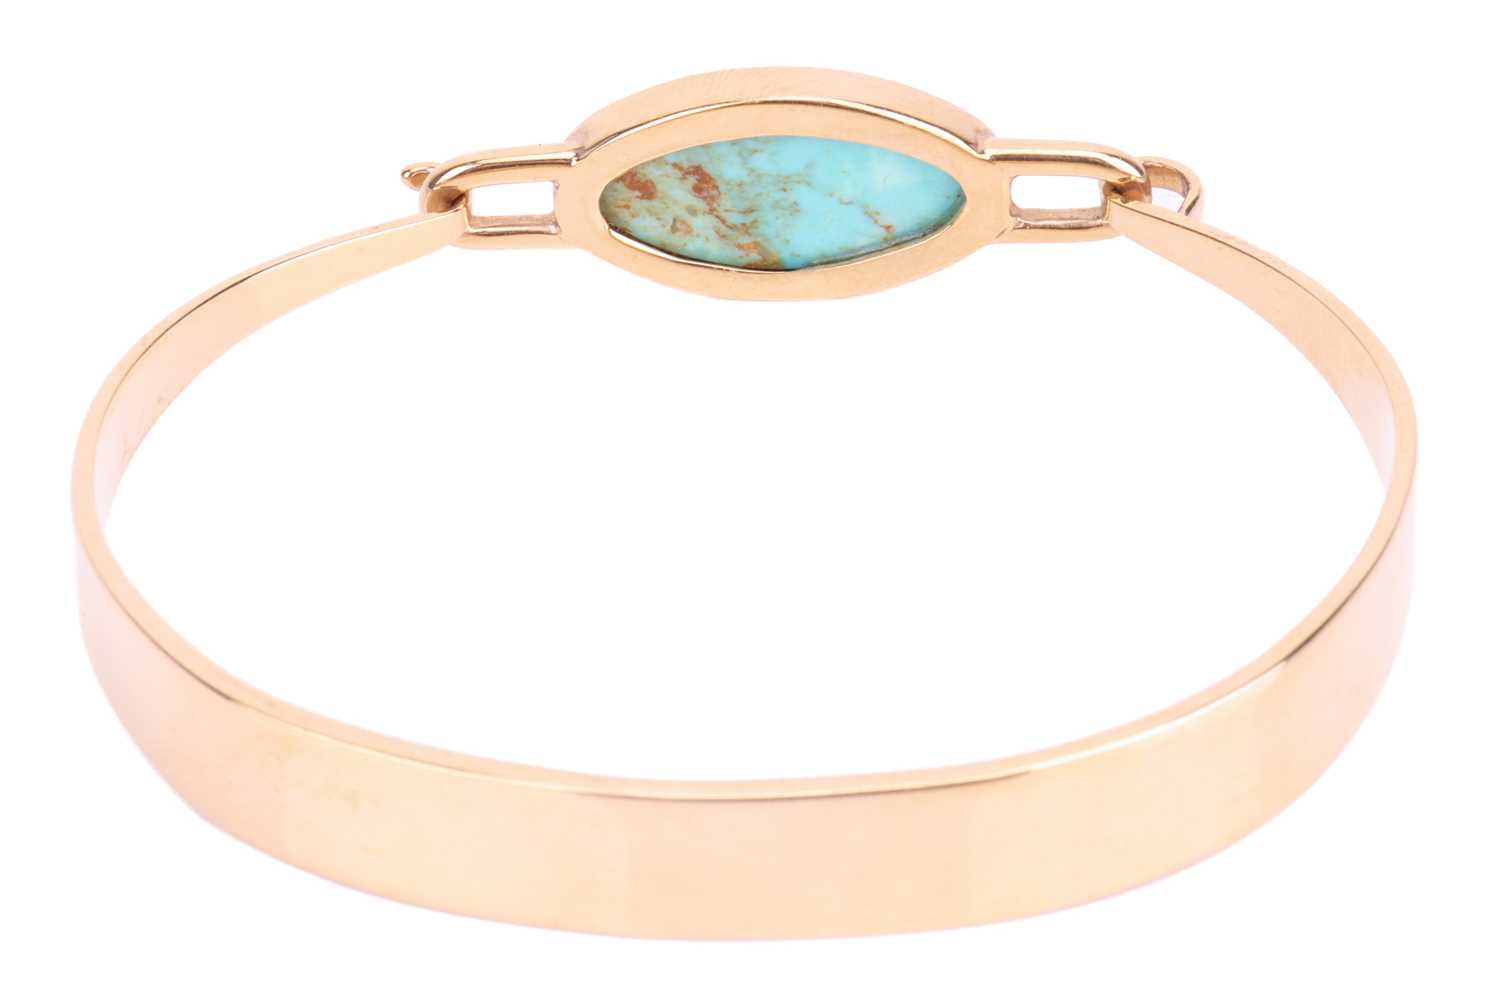 A turquoise-set bangle in 9ct yellow gold, tension clamp opening bracelet featuring a navette-shaped - Image 4 of 5